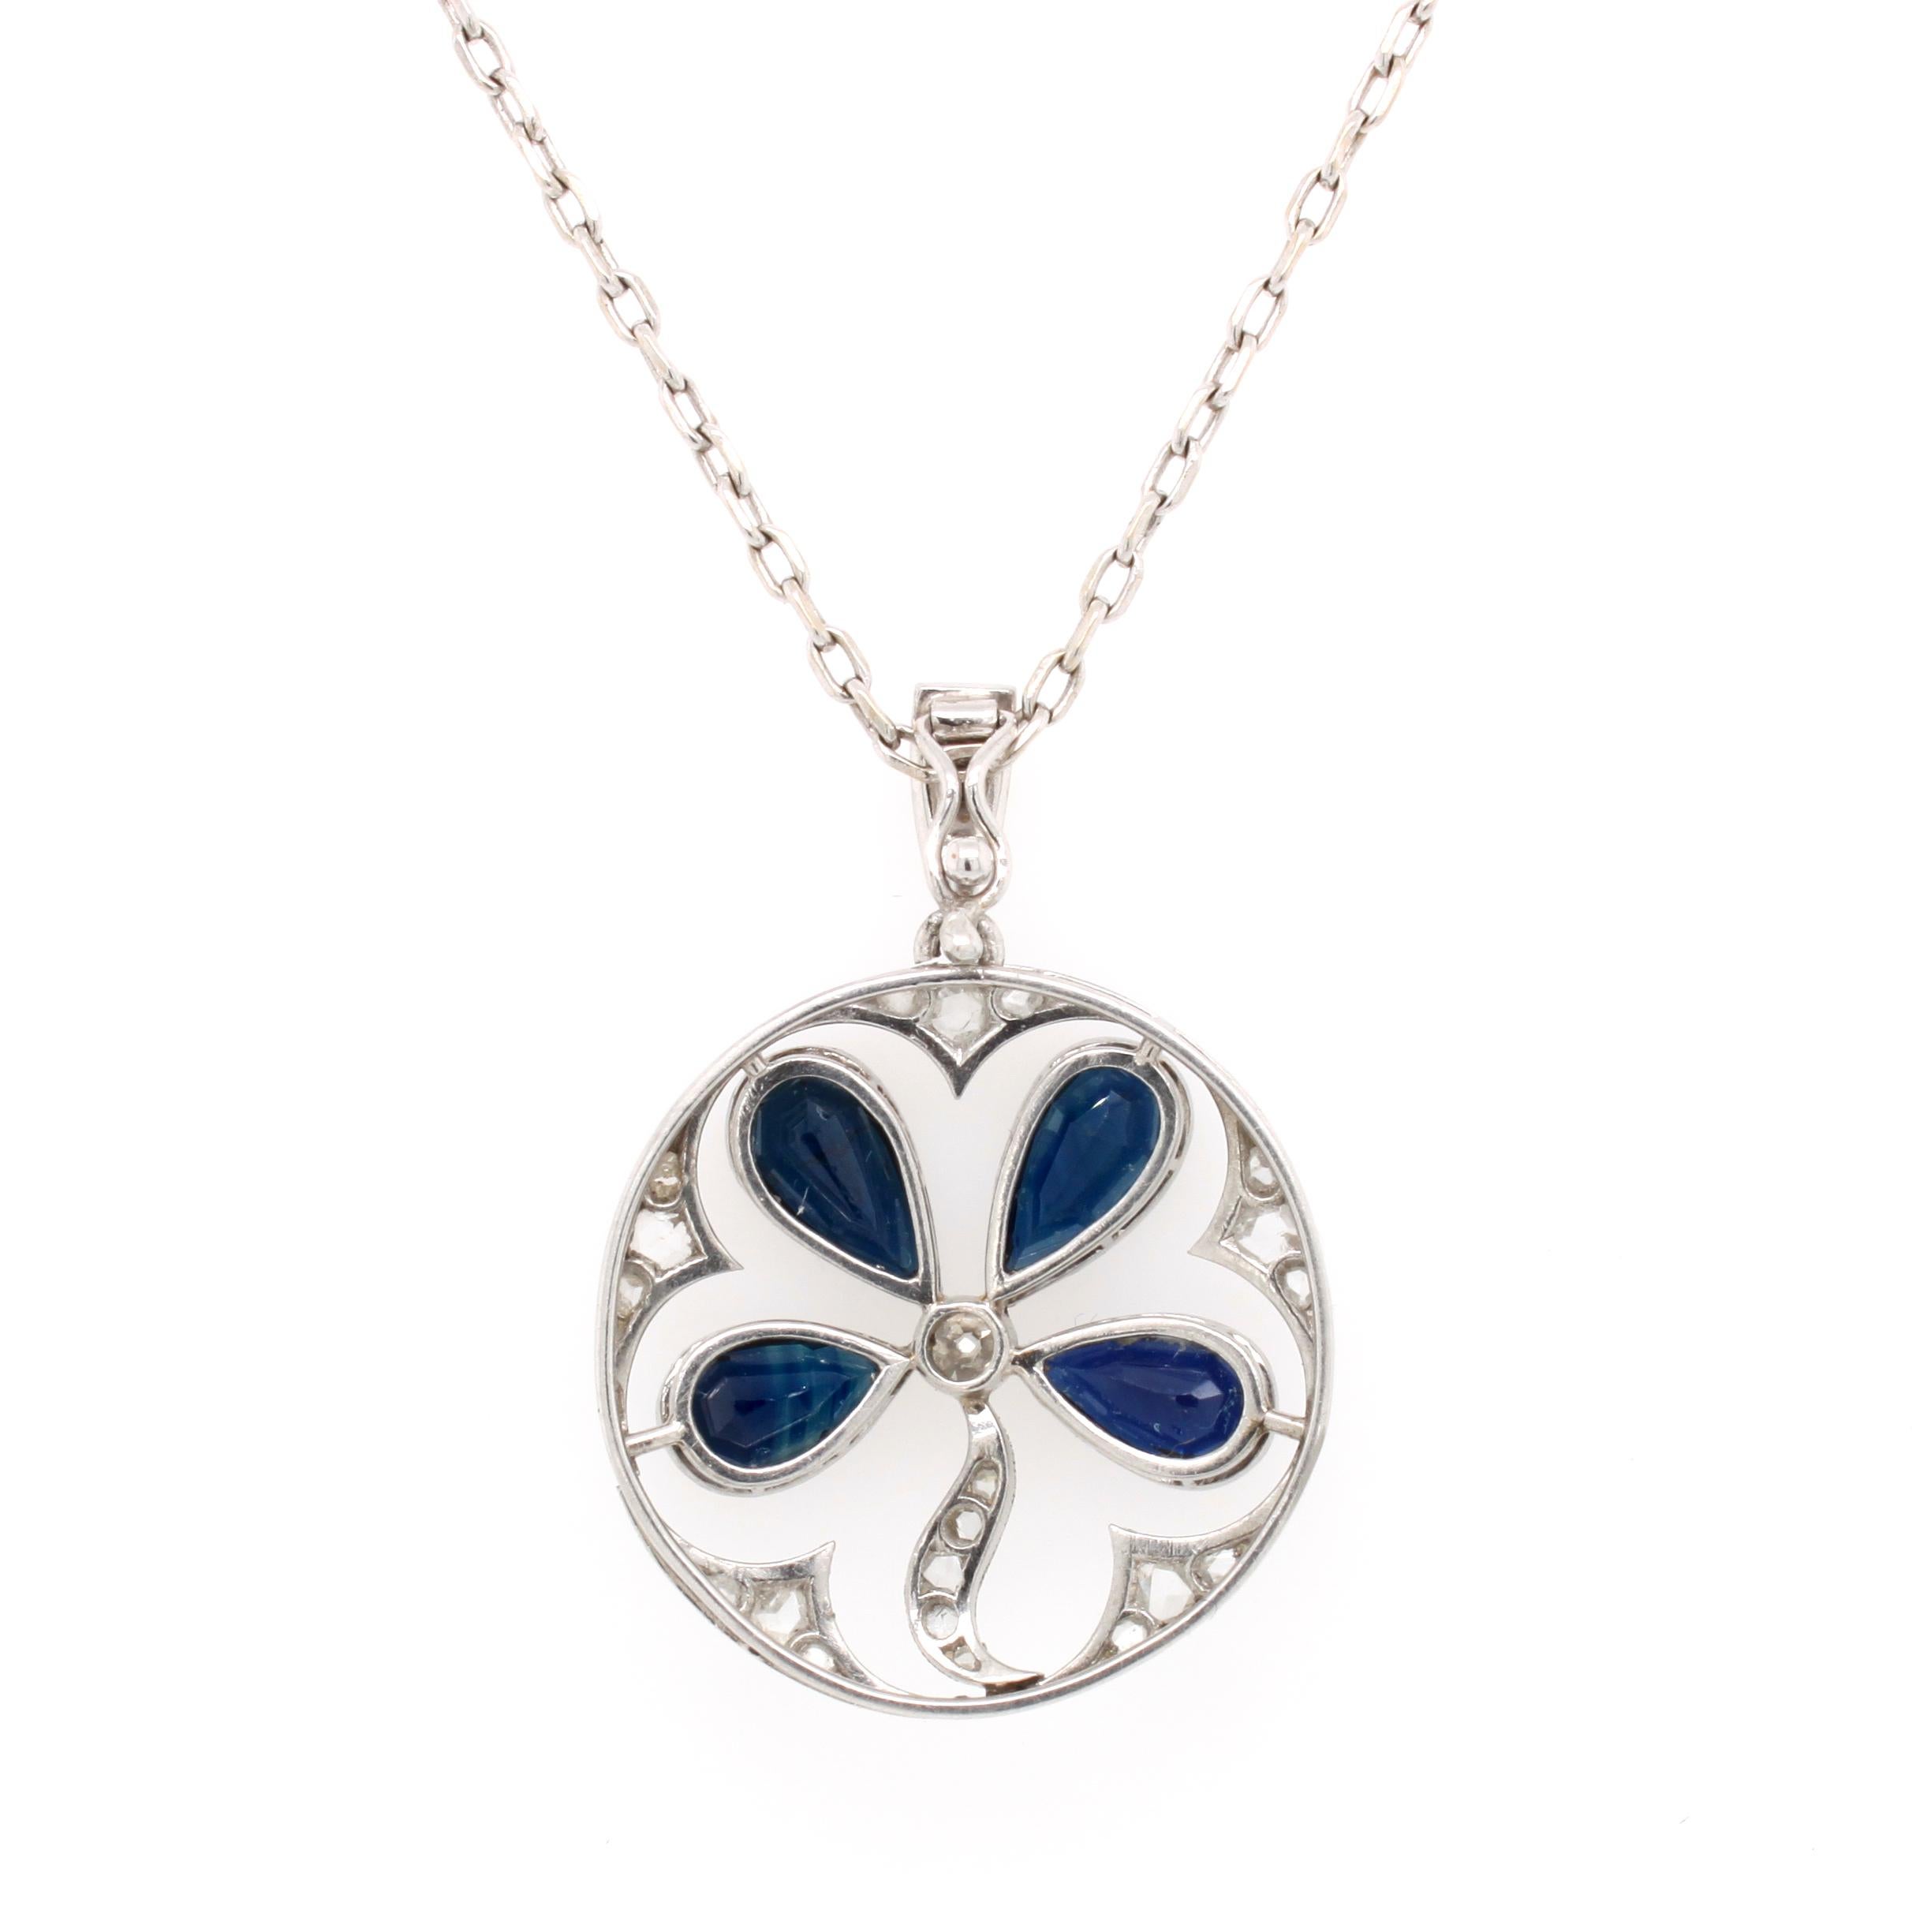 A sapphire and diamond clover or trefoil pendant in platinum, ca. 1910s, Belle Époque. This round pendant has a four leaf clover depicted in the center made out of four sapphire pear shapes, which are surrounded by rosecut diamonds. The four leaved